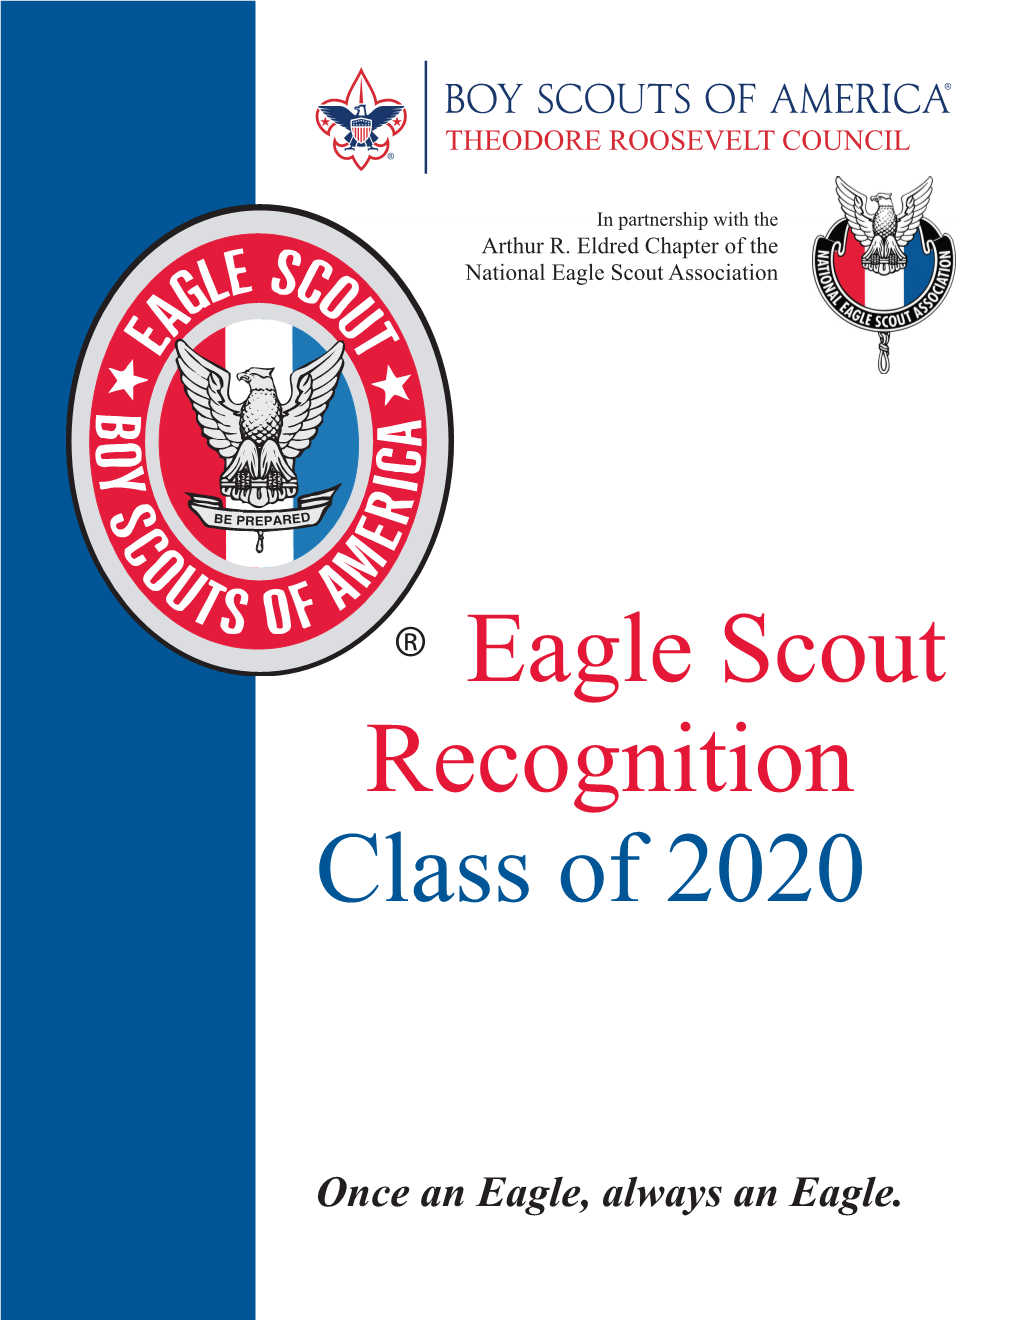 Eagle Scout Recognition Class of 2020